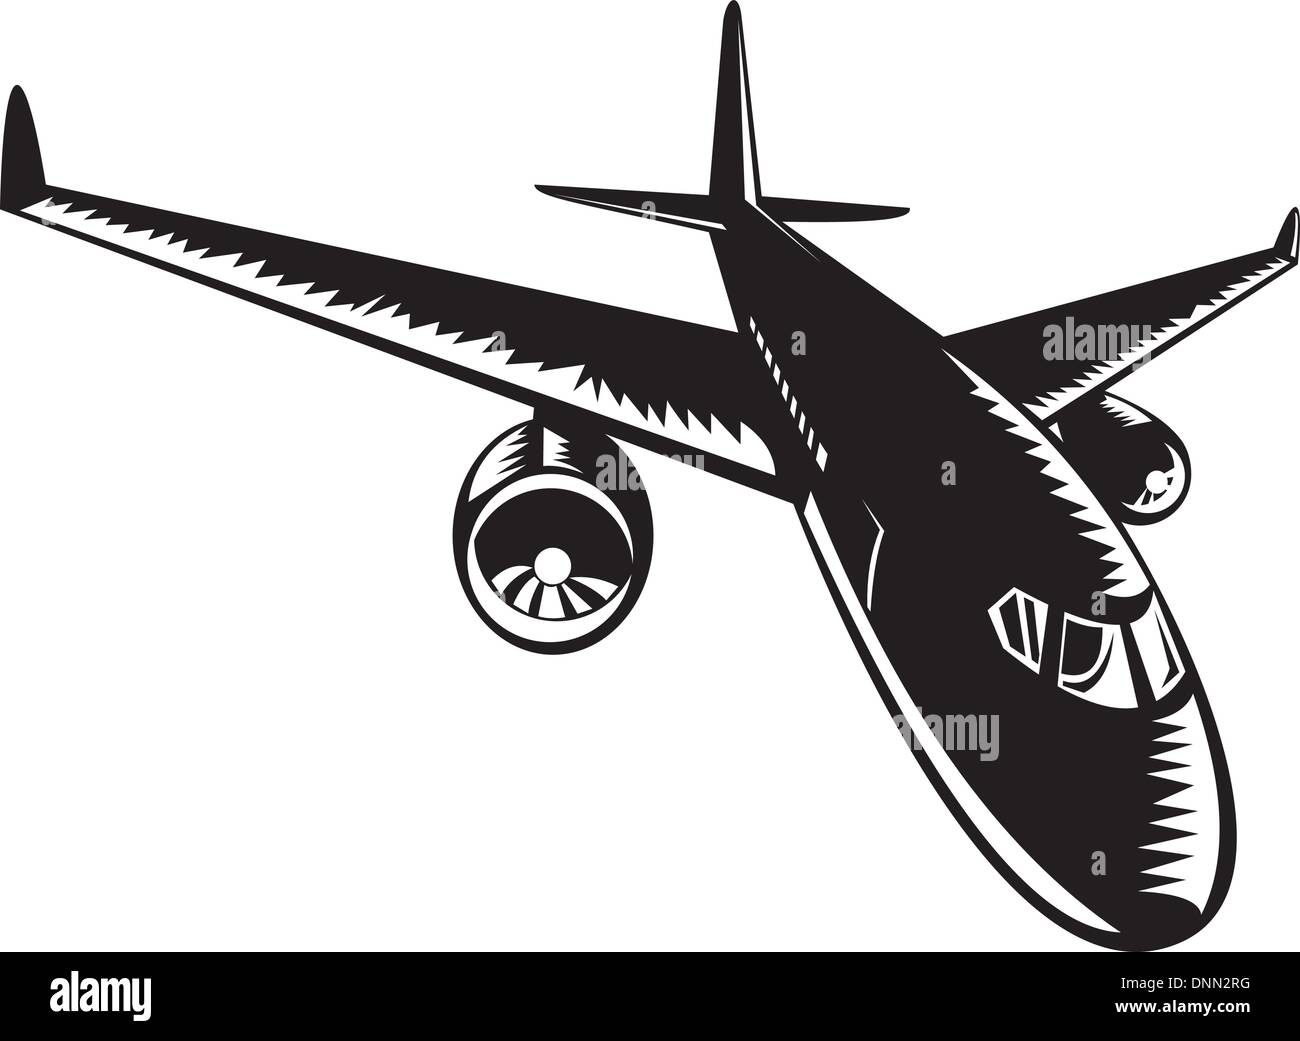 illustration of a commercial jet plane airliner on isolated background Stock Vector